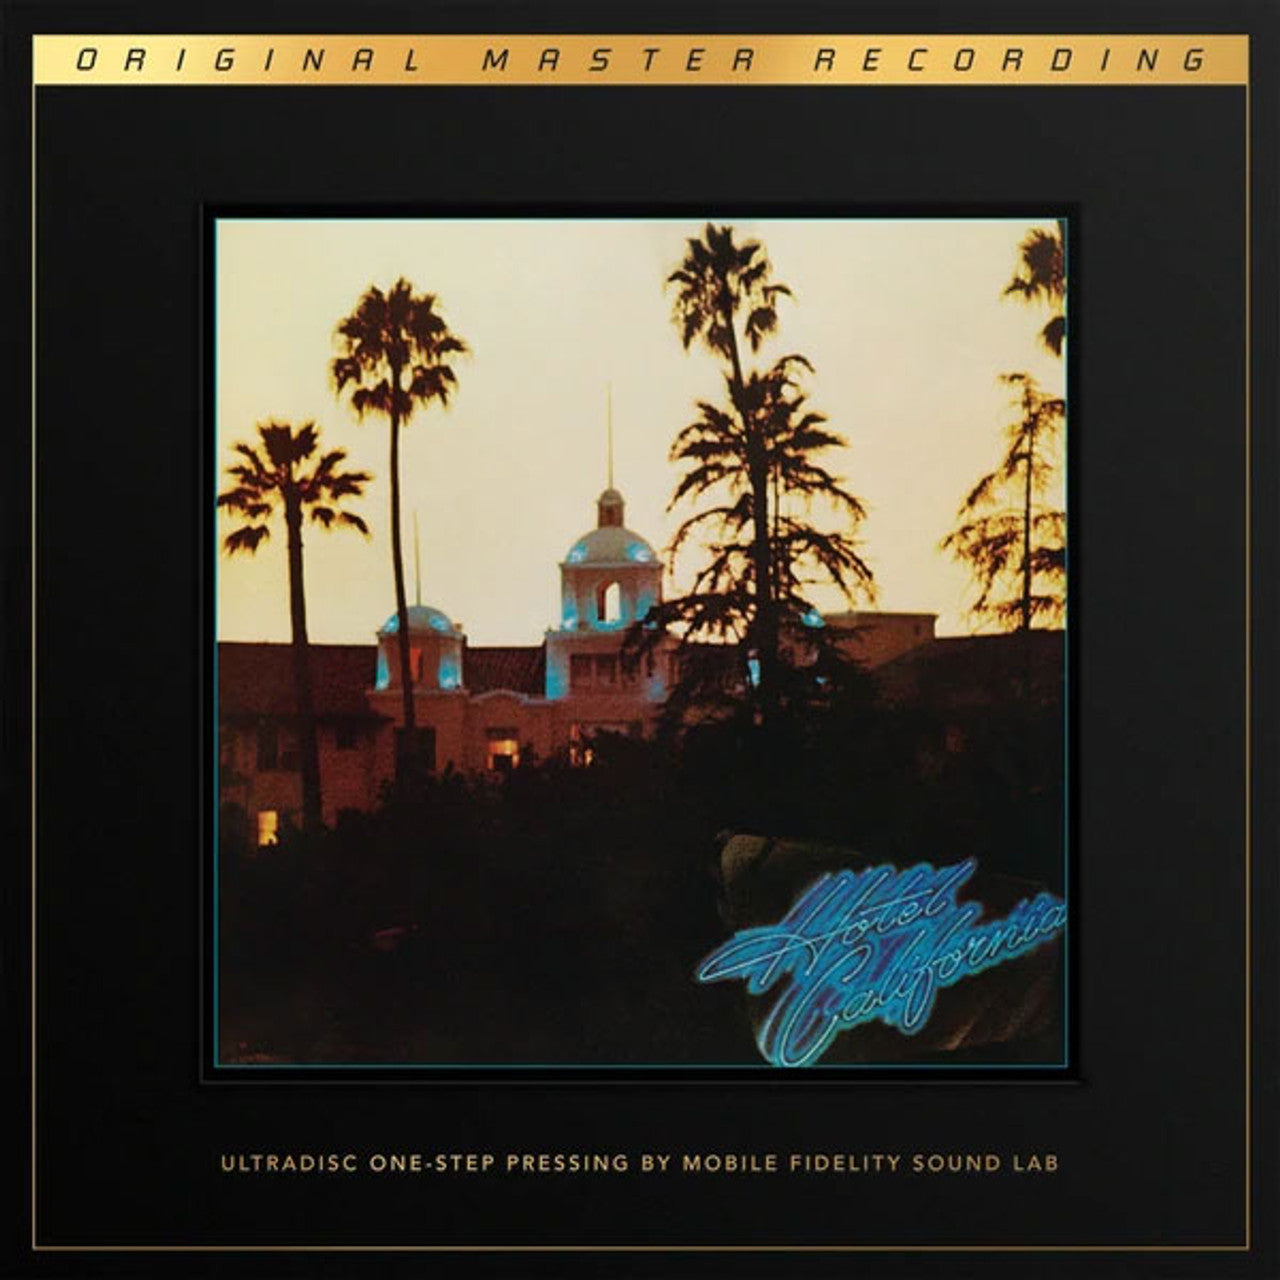 Eagles - Hotel California [2LP Box] (180 Gram 45RPM Audiophile SuperVinyl UltraDisc One-Step, limited/numbered to 17,500) (Mobile Fidelity)